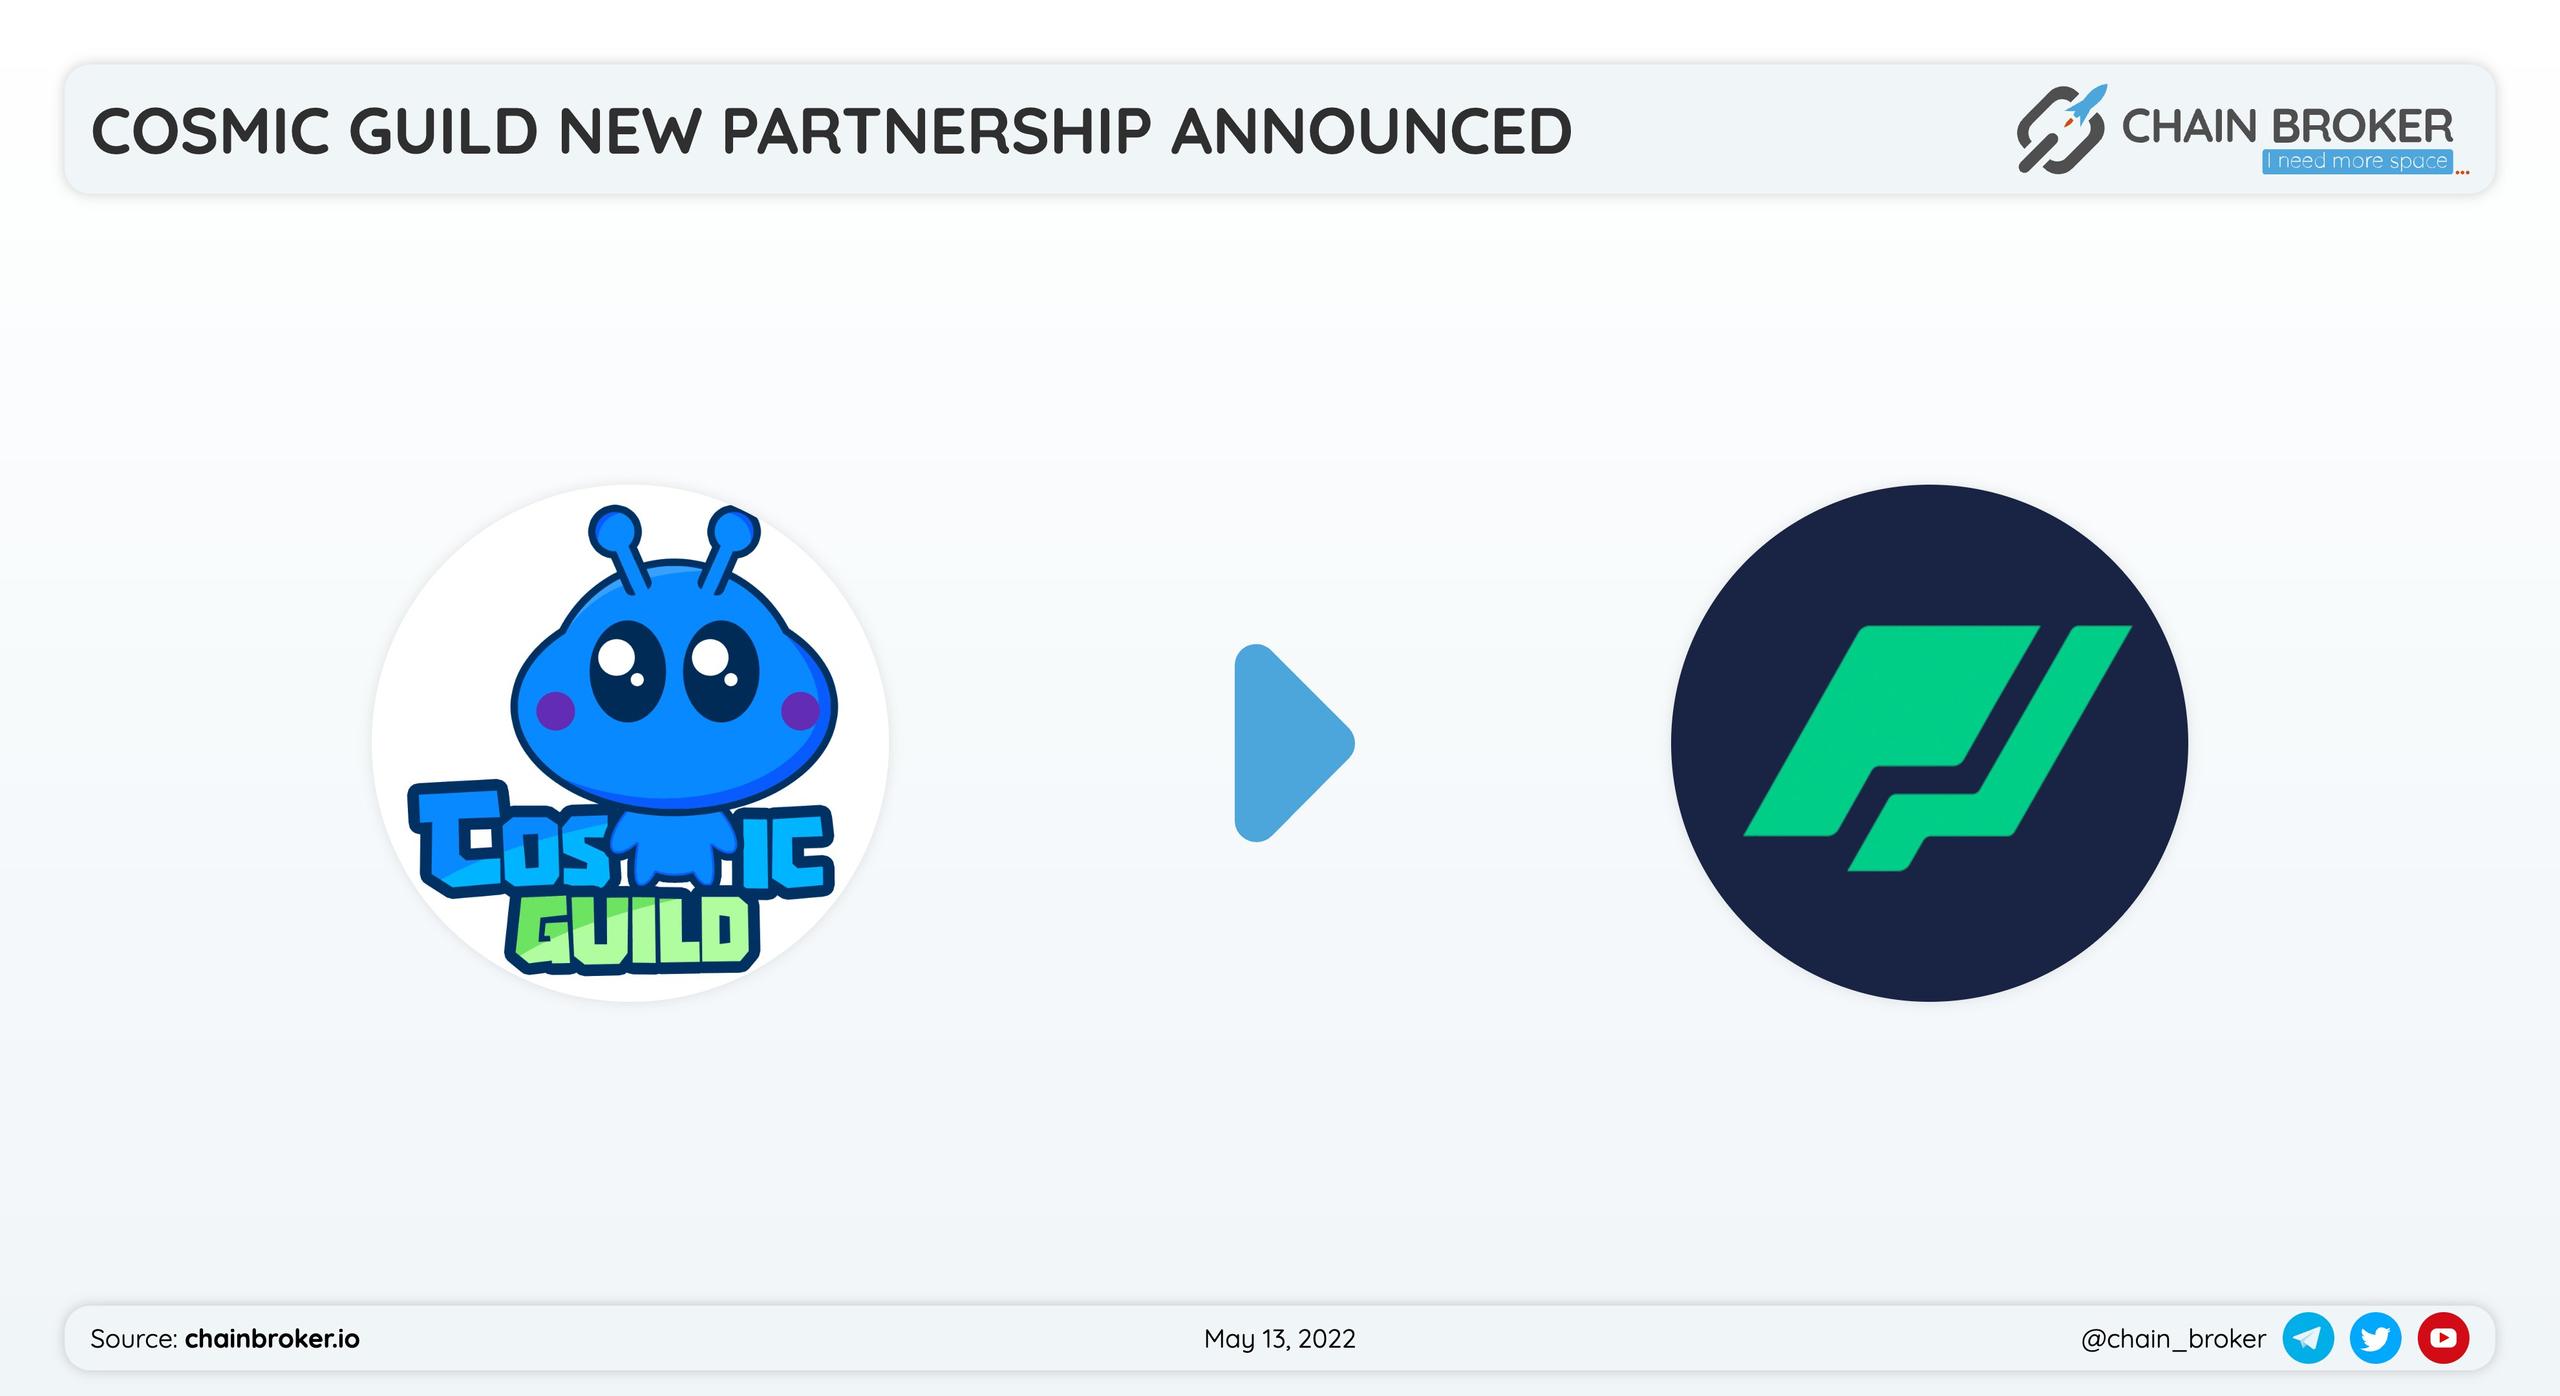 Cosmic Guild has partnered PDAX